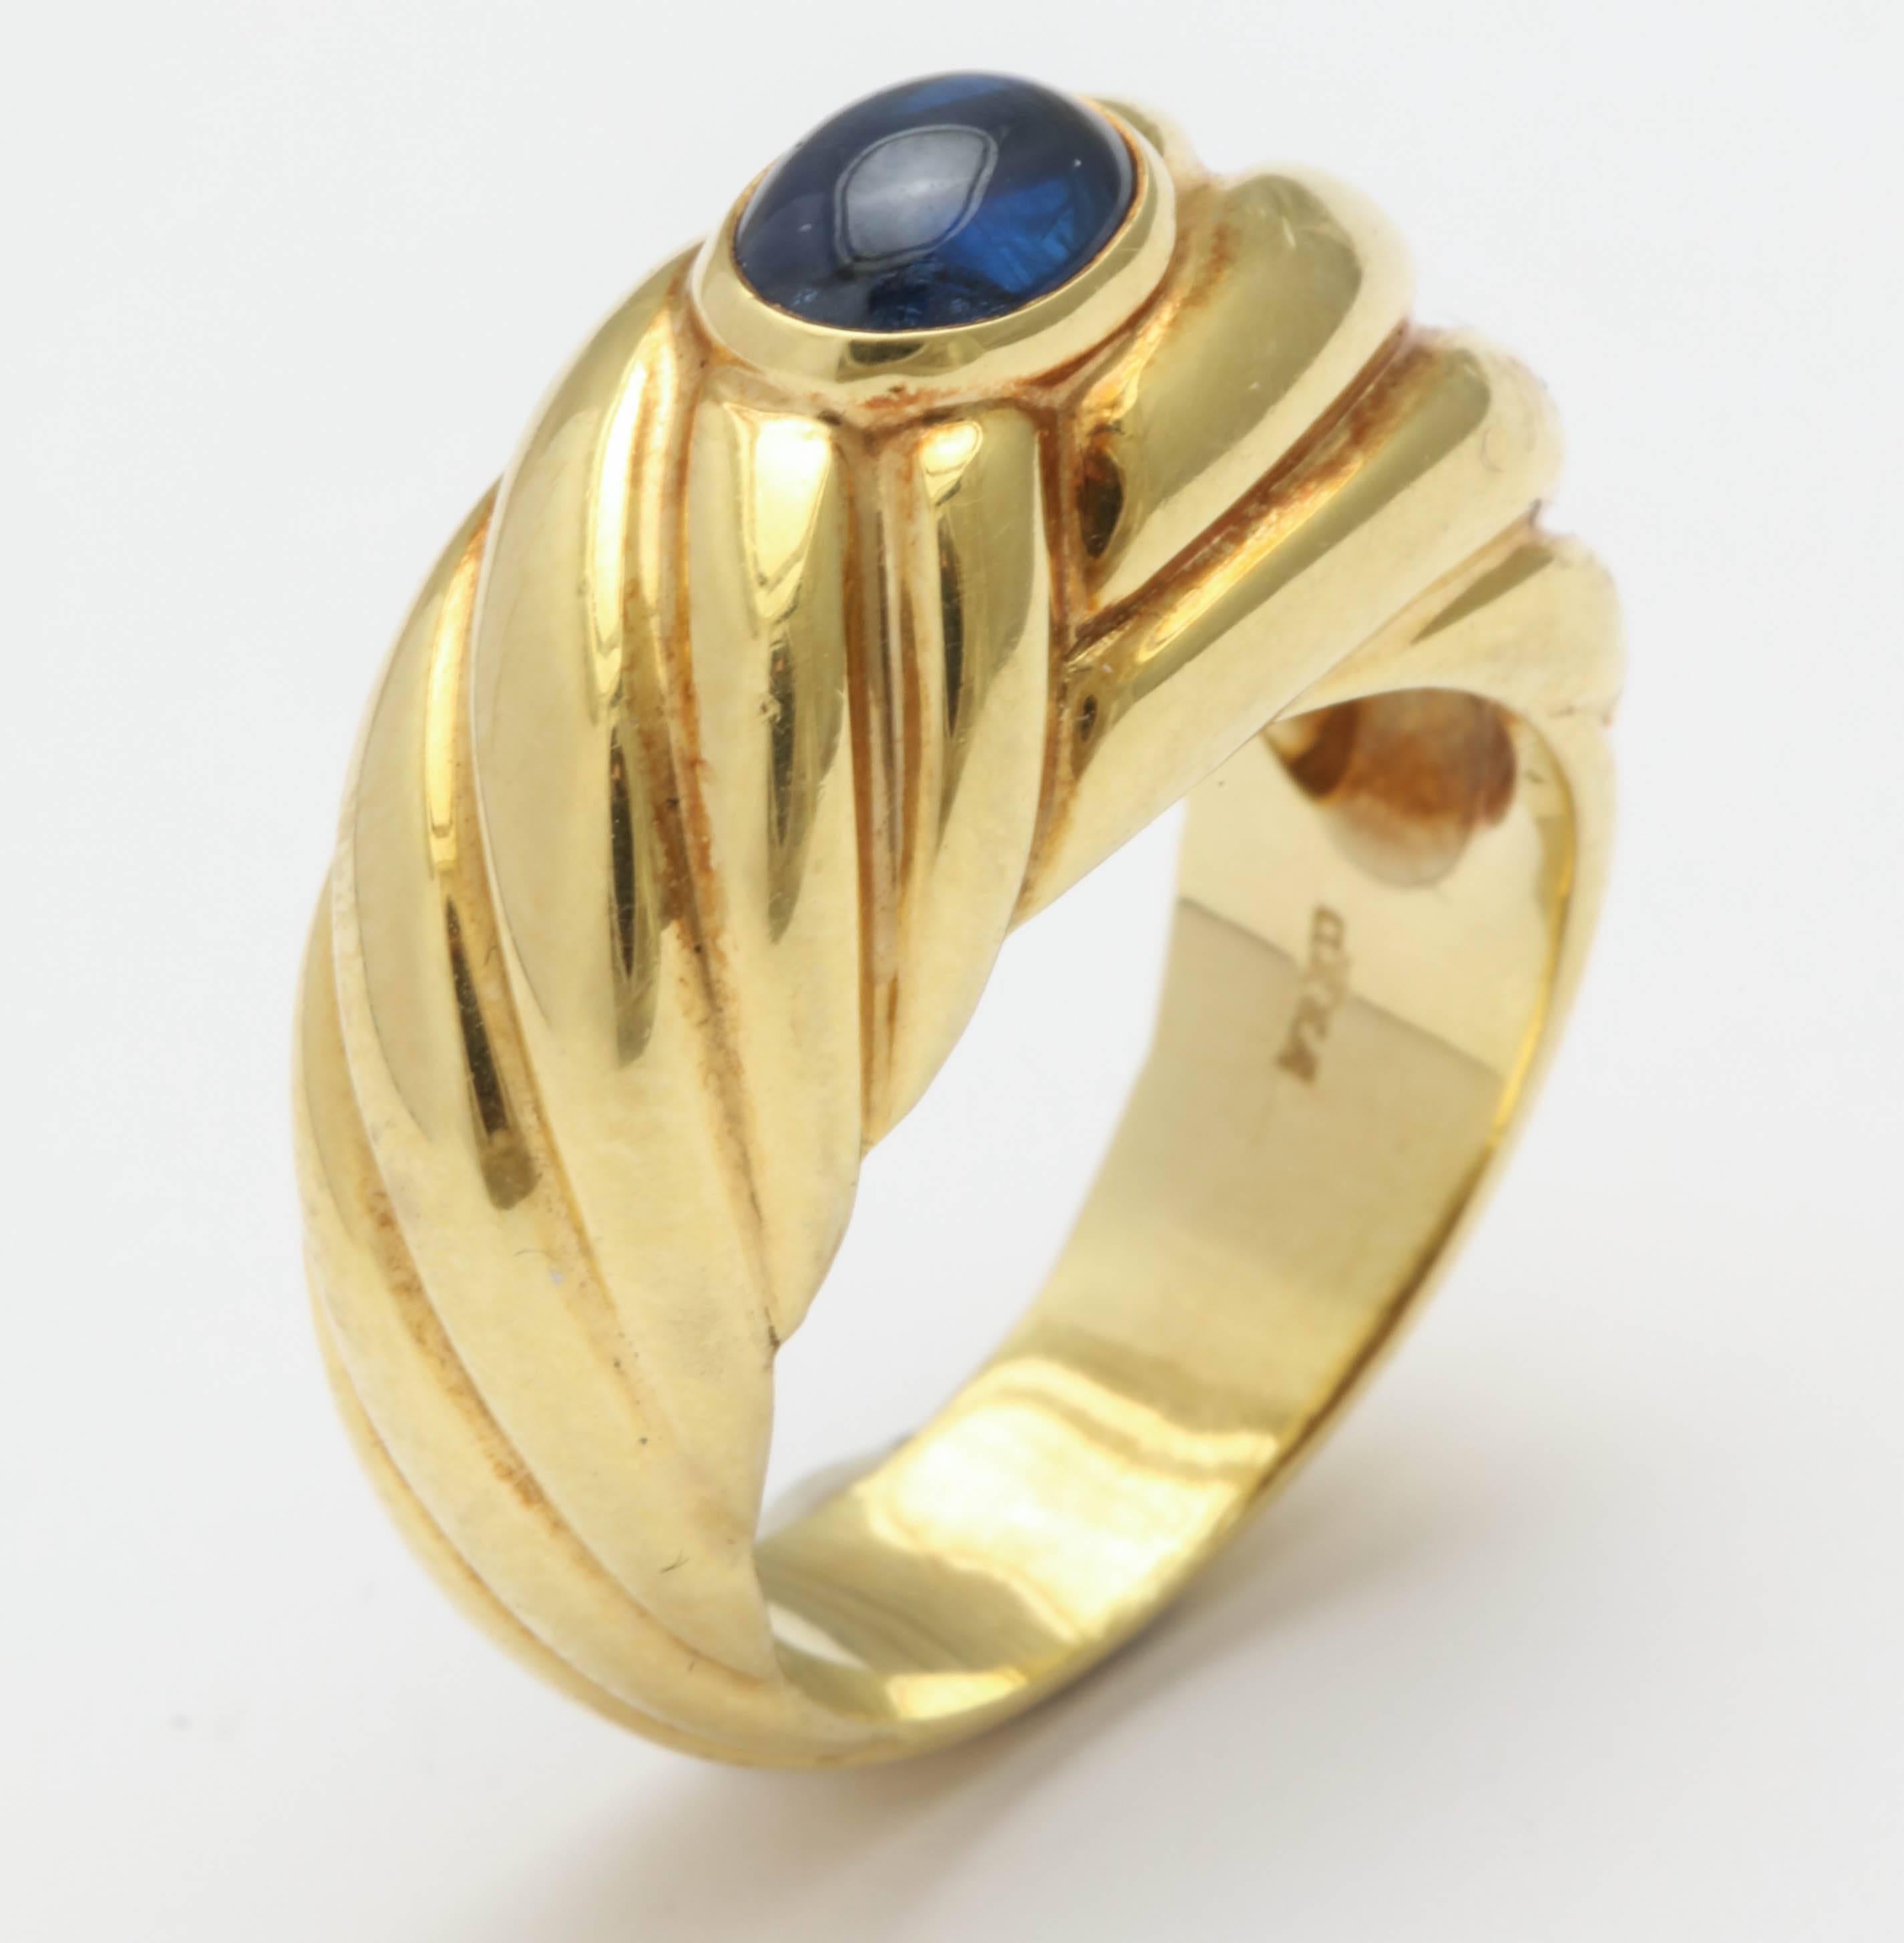  Cabochon Sapphire and Yellow Gold Ring signed Fred 2